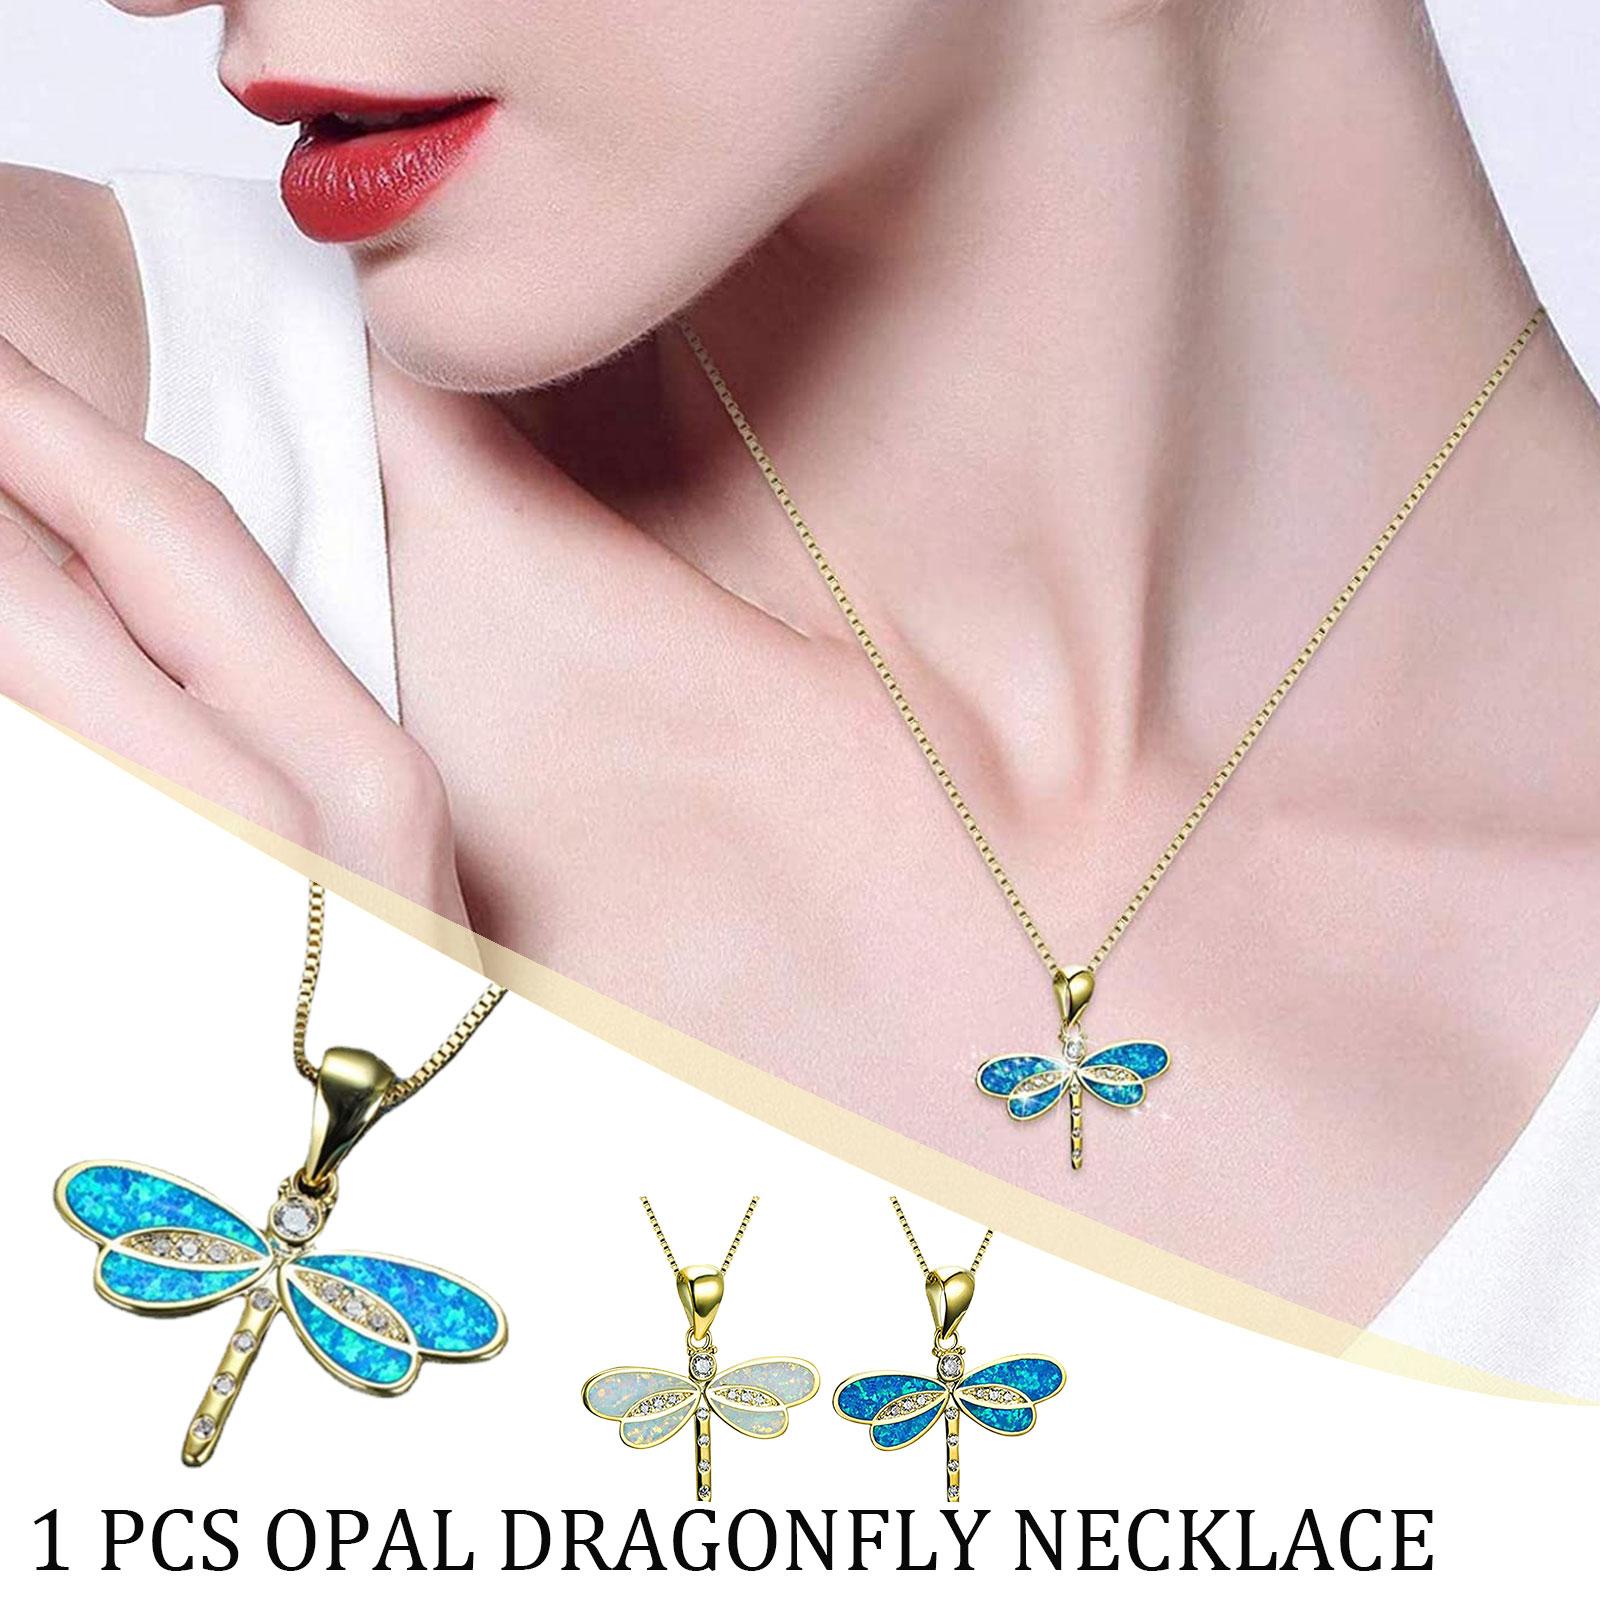 Dragonfly Necklace Pendant Choker For Women Girls White Gold Blue Silver Y5G3 - image 4 of 9